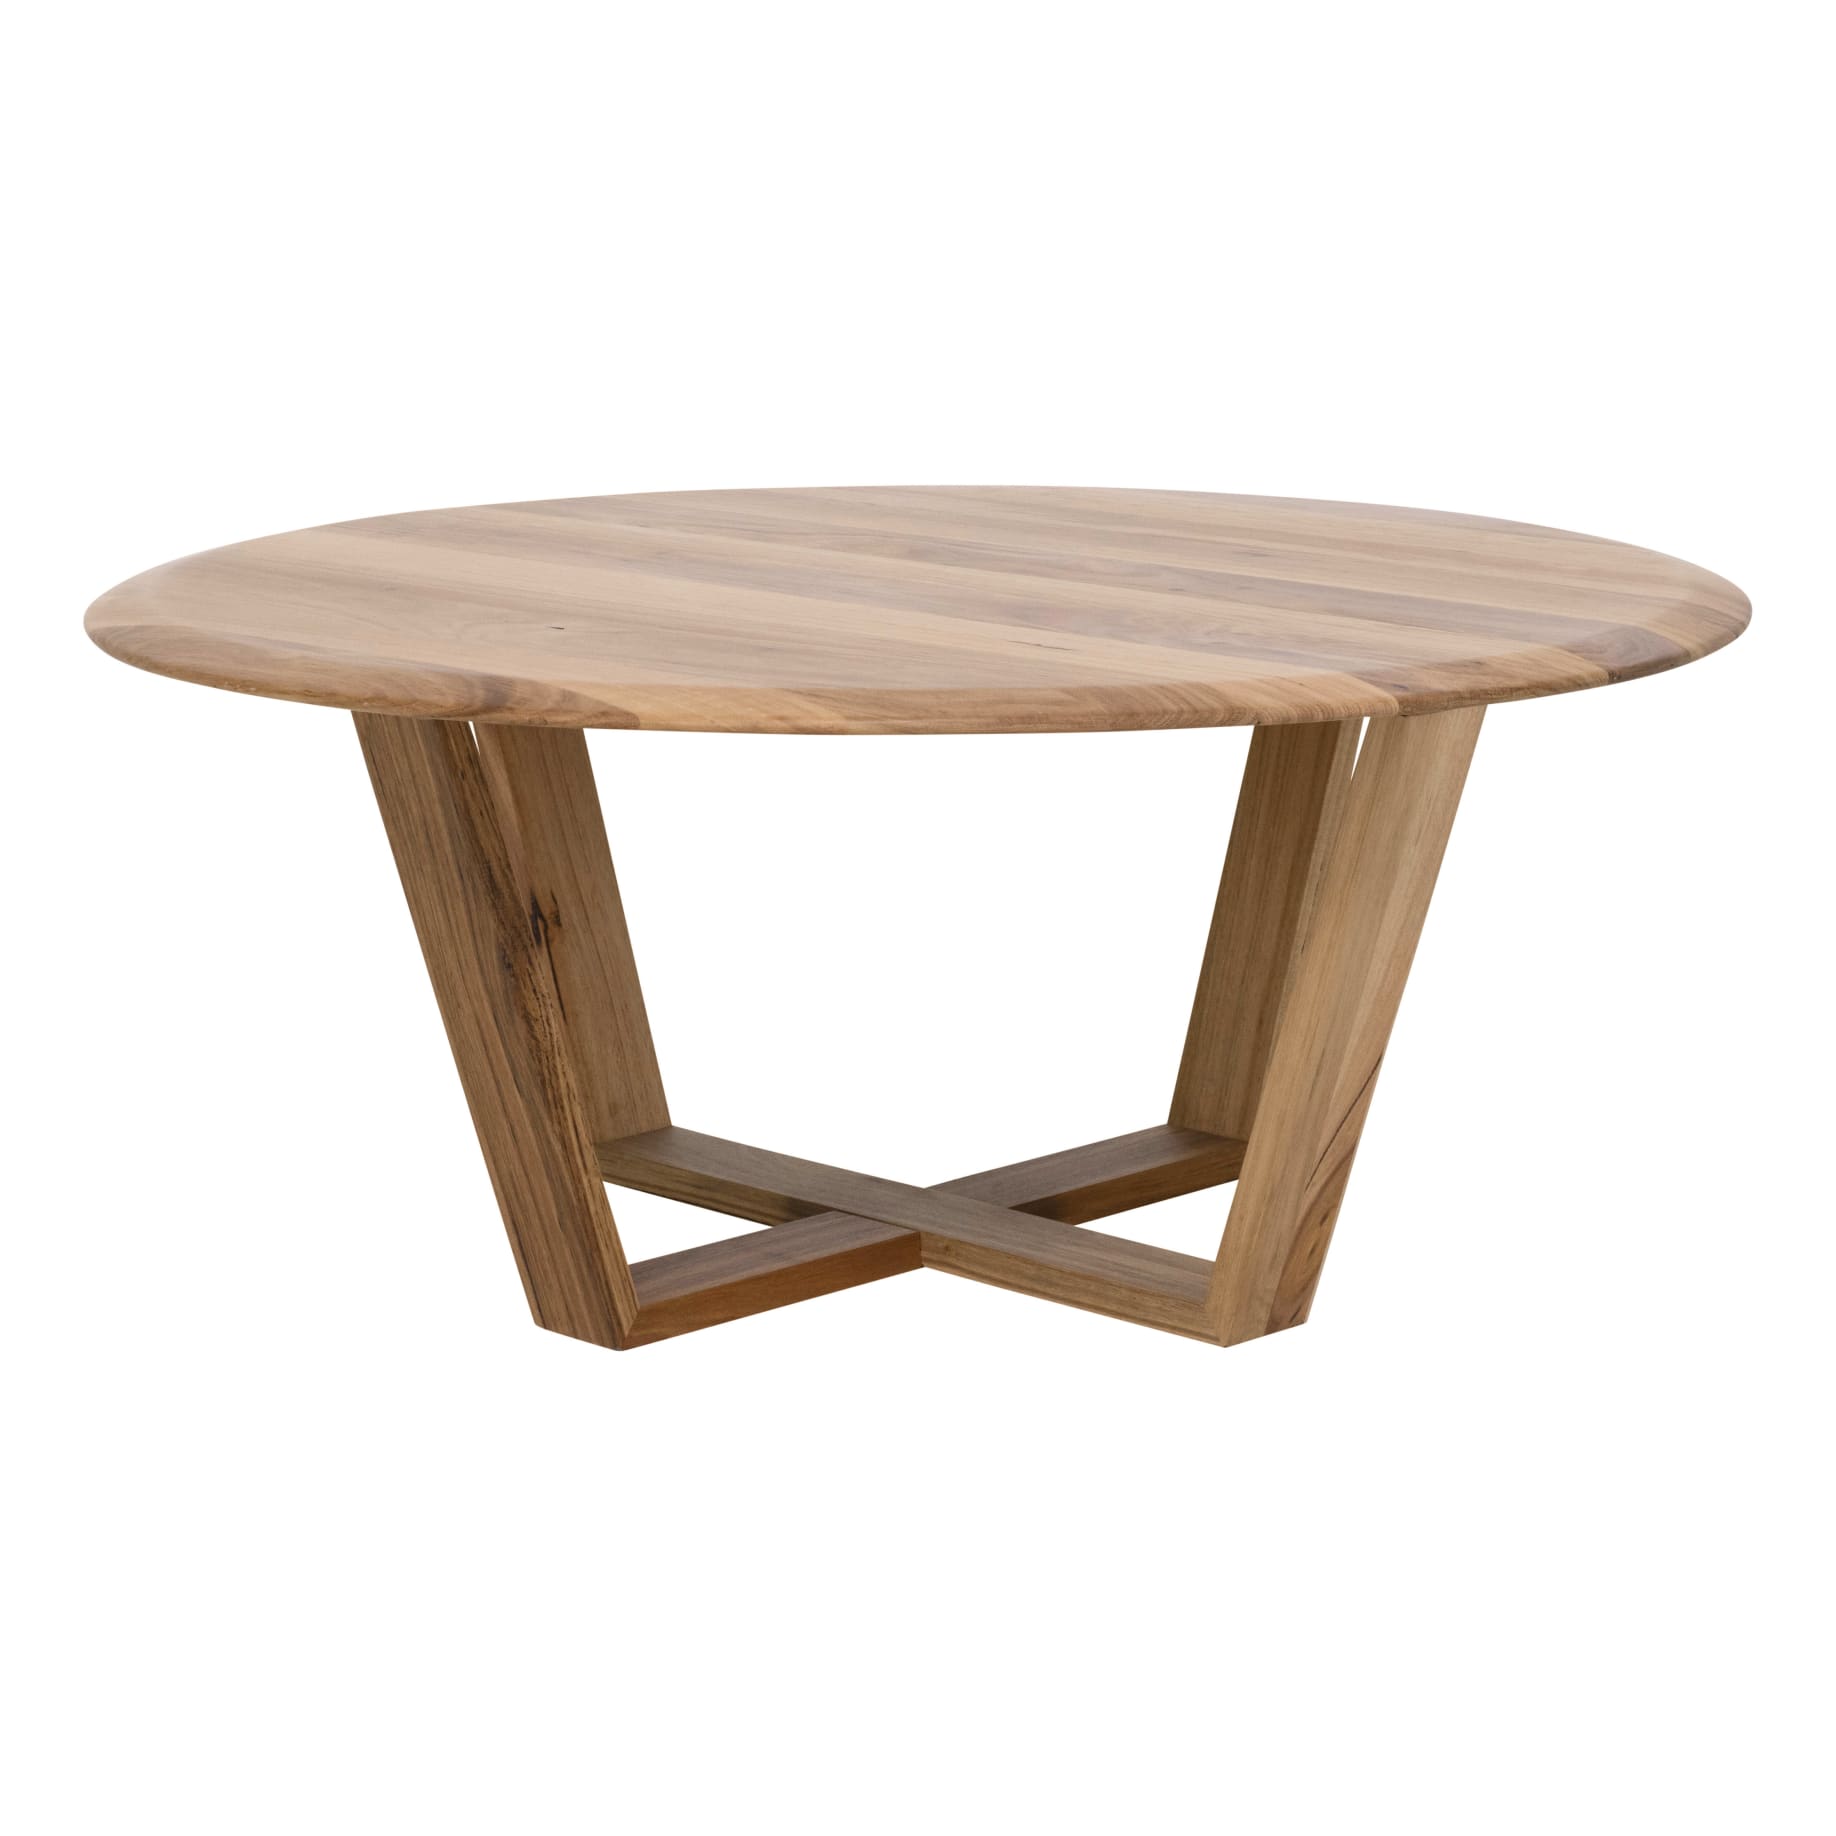 Baxter Round Coffee Table 100cm in Australian Messmate